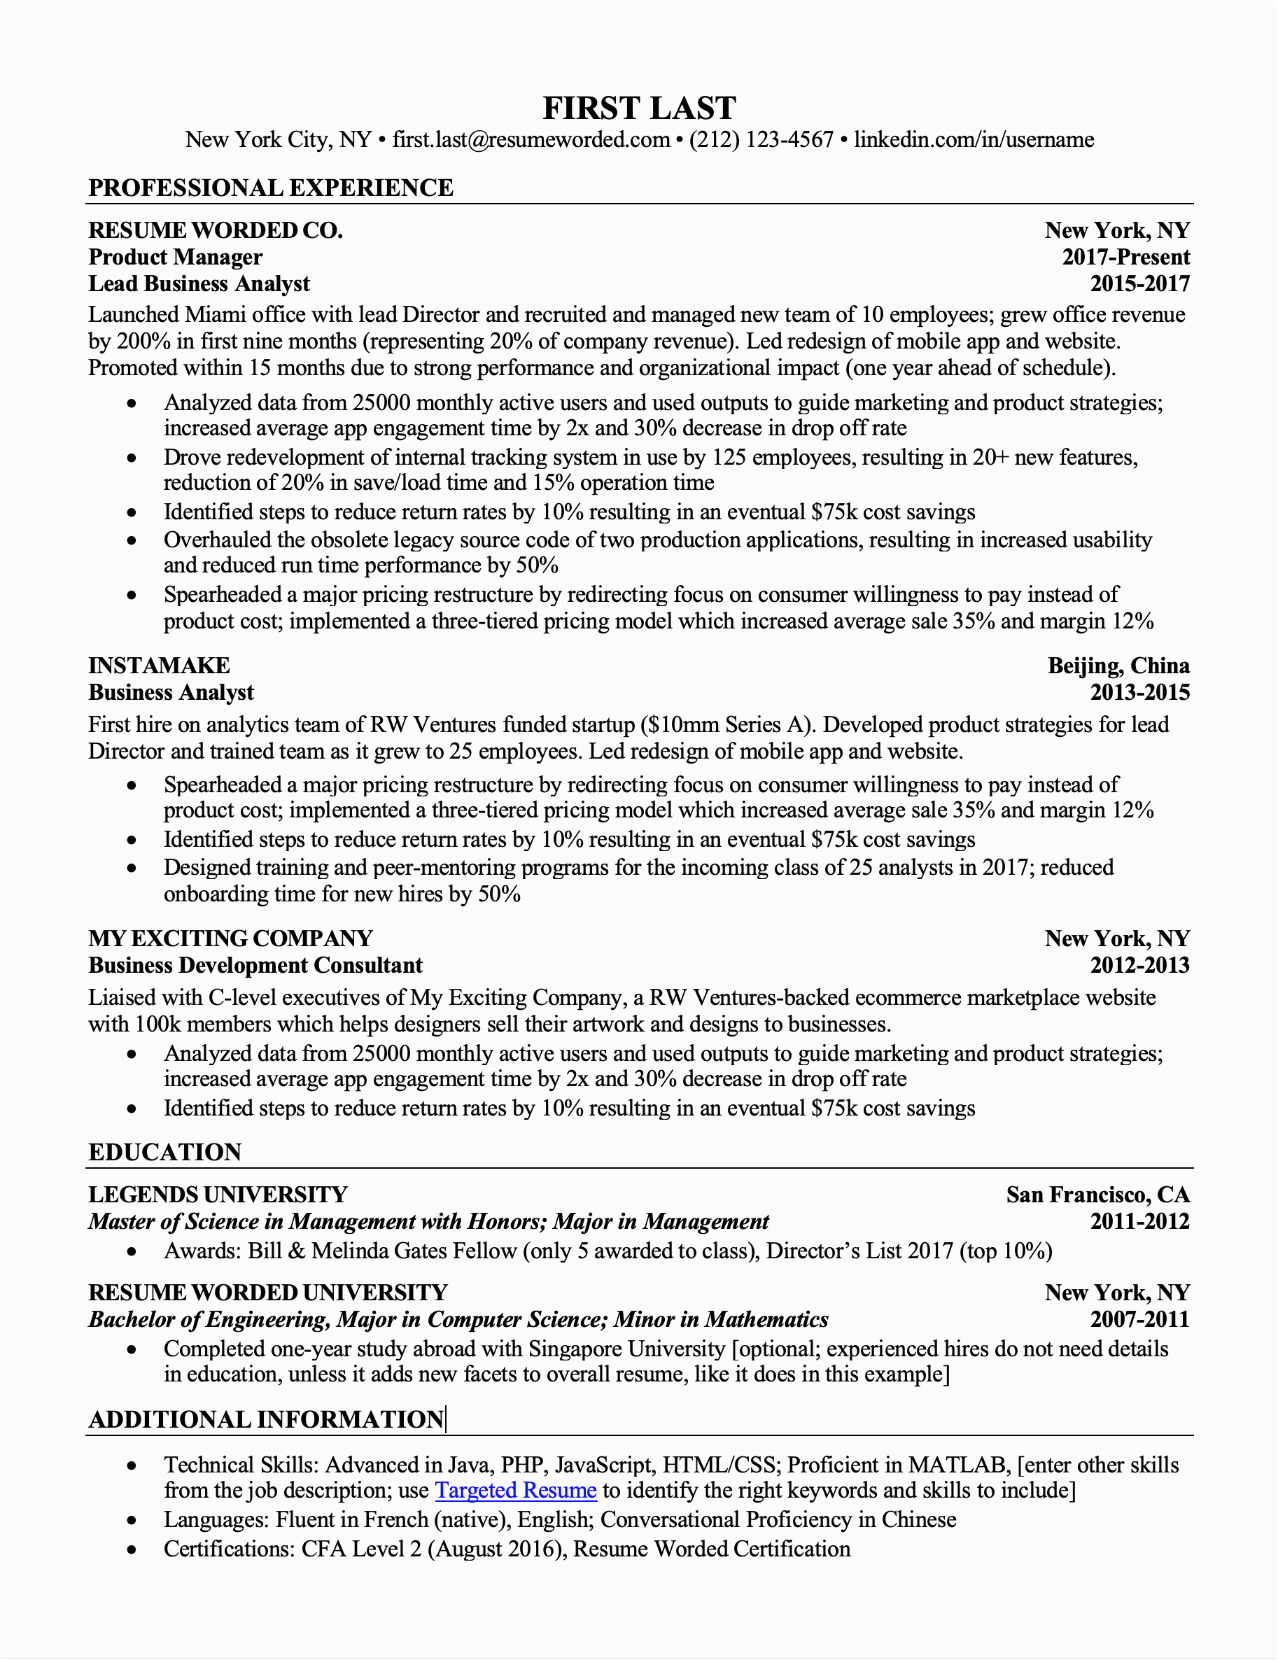 Resume Template for Experienced It Professionals Work Experience Resume format for Experienced the 2